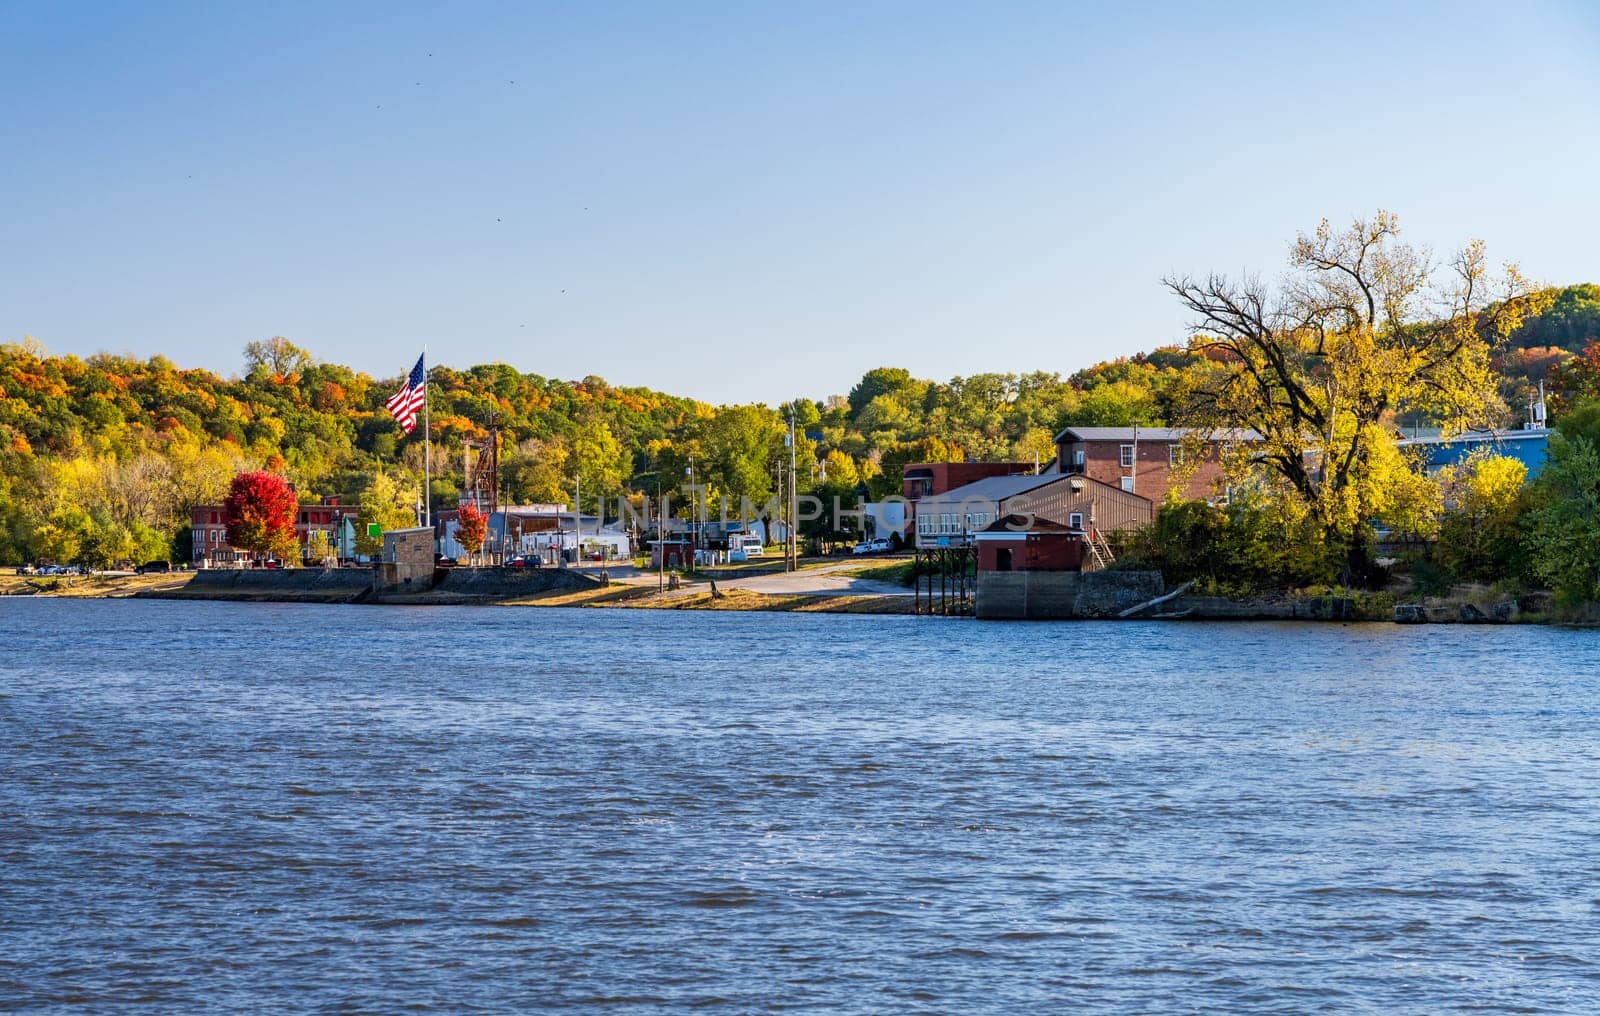 The small town of Louisiana MO on the banks of the Mississippi River by steheap